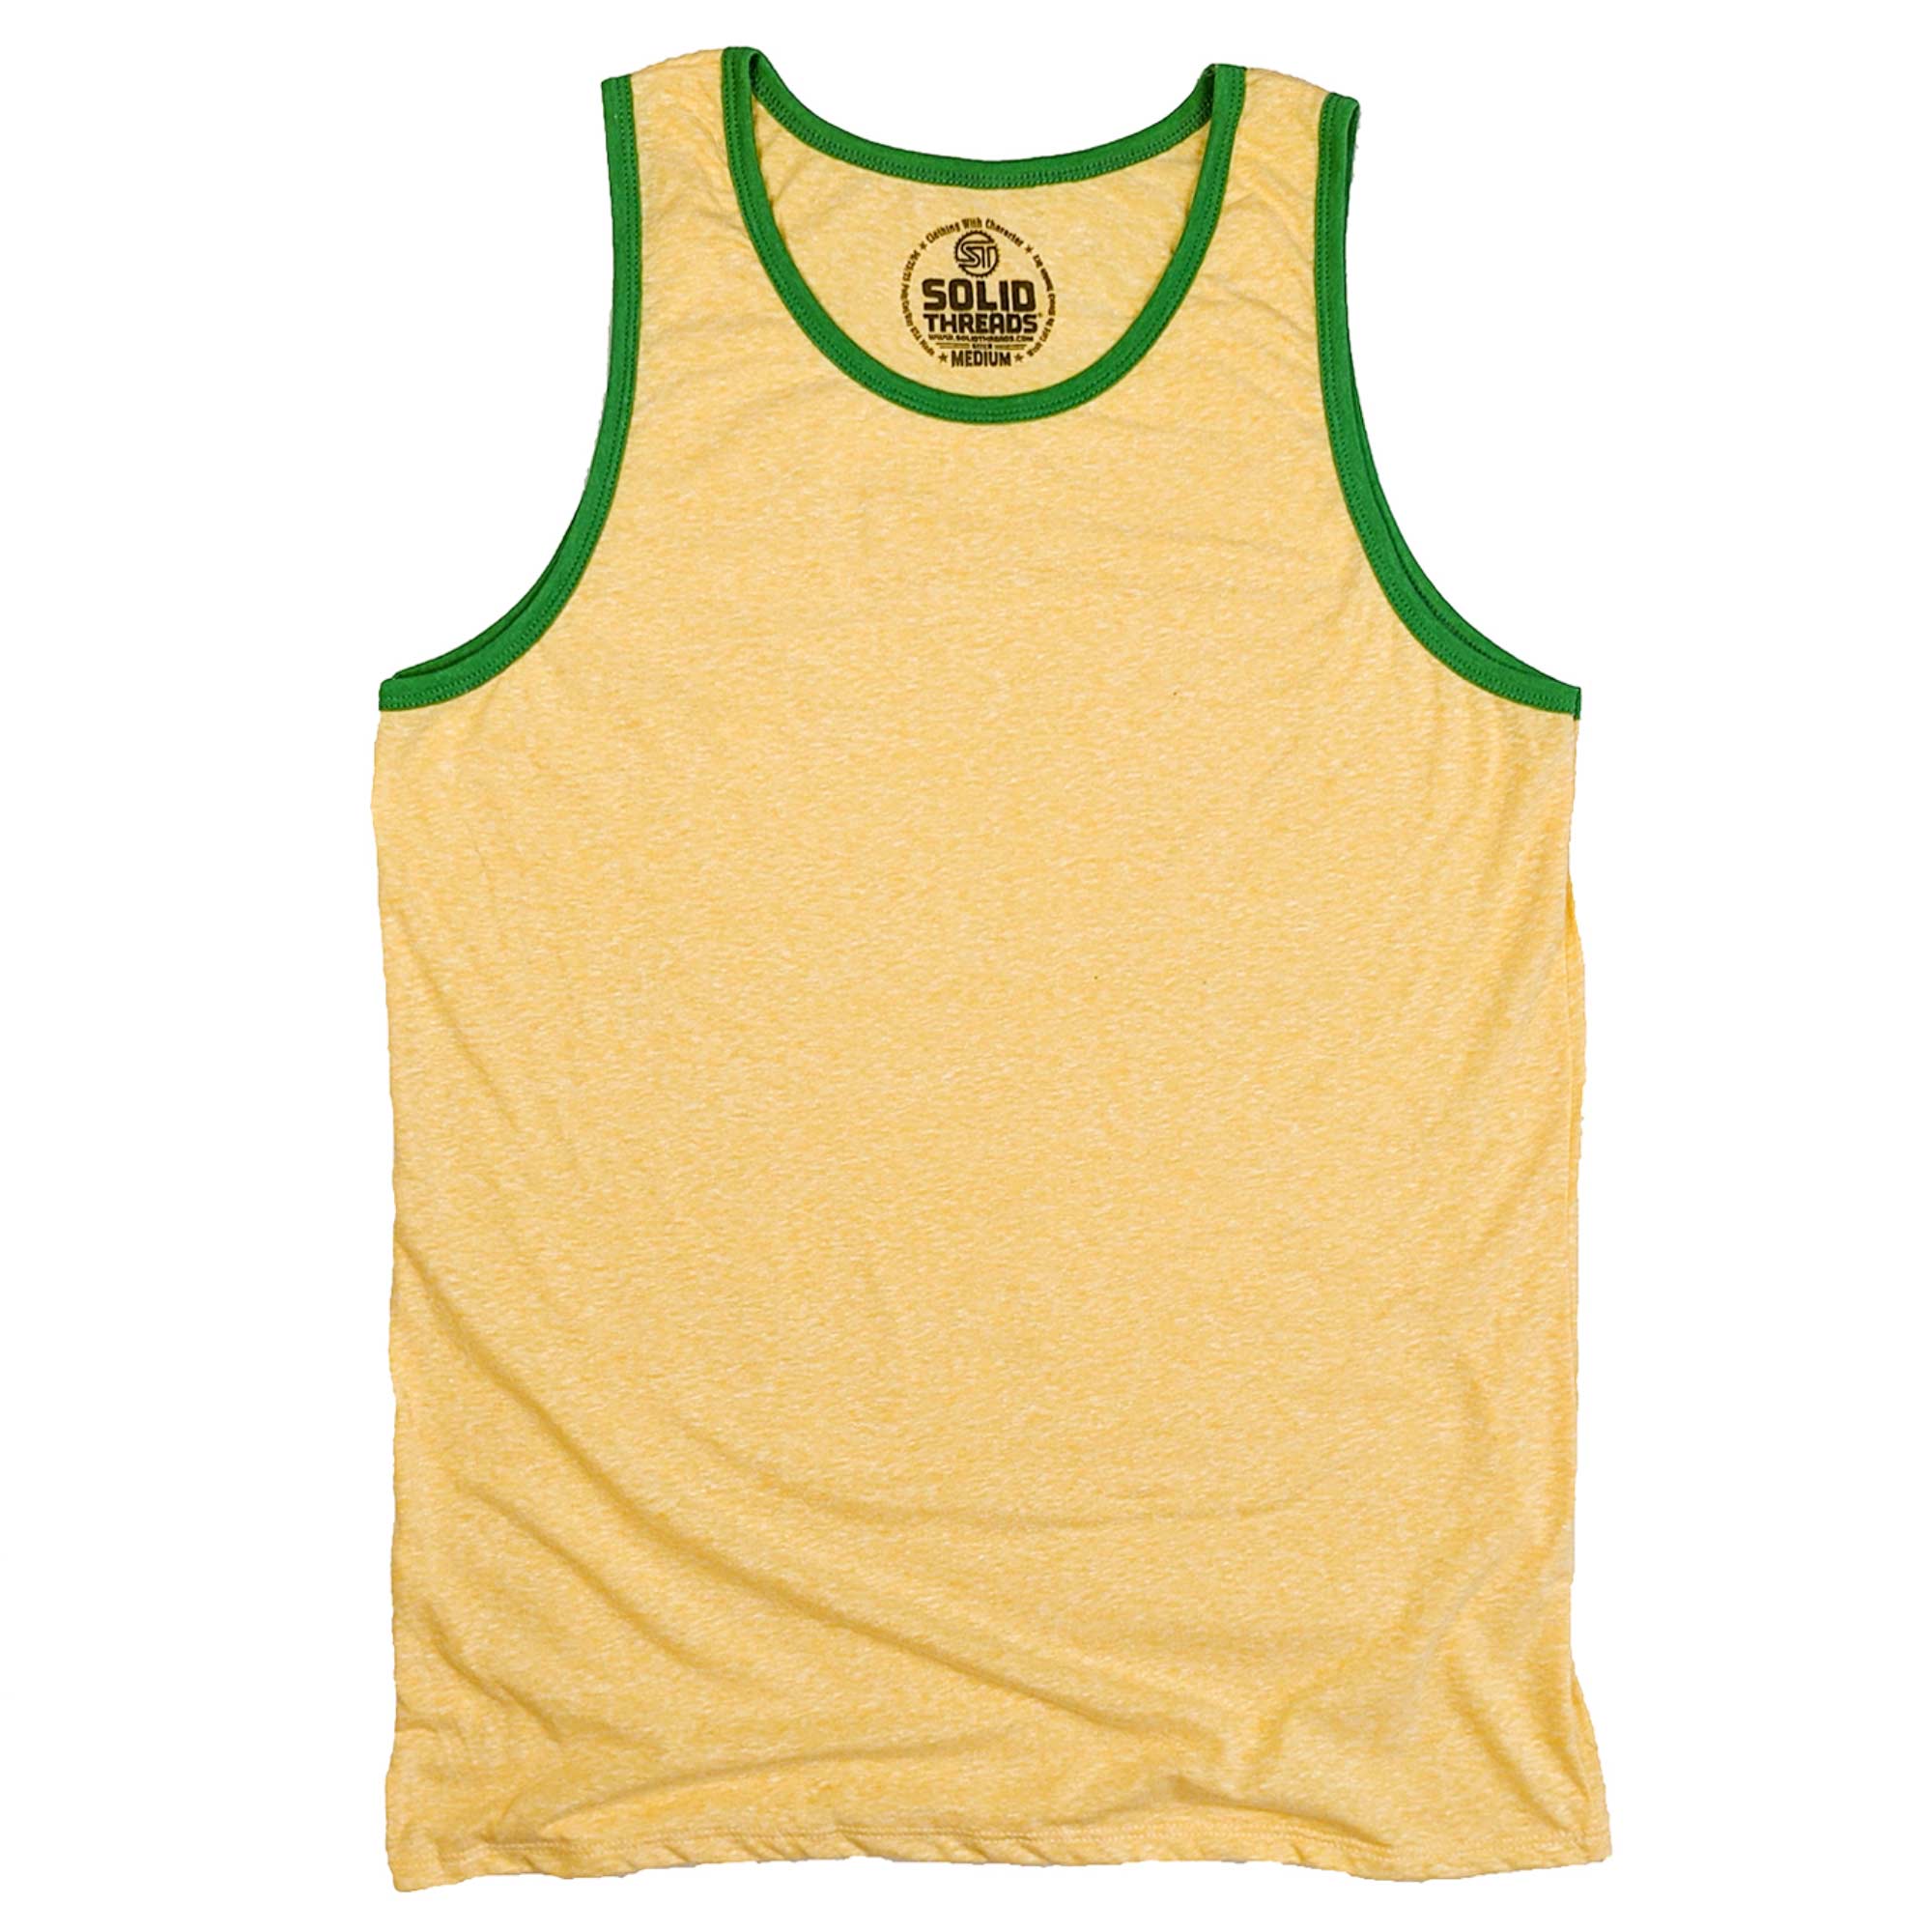 Men's Tank Tops  Shop Cool Vintage & Retro Sleeveless Tees - Solid Threads